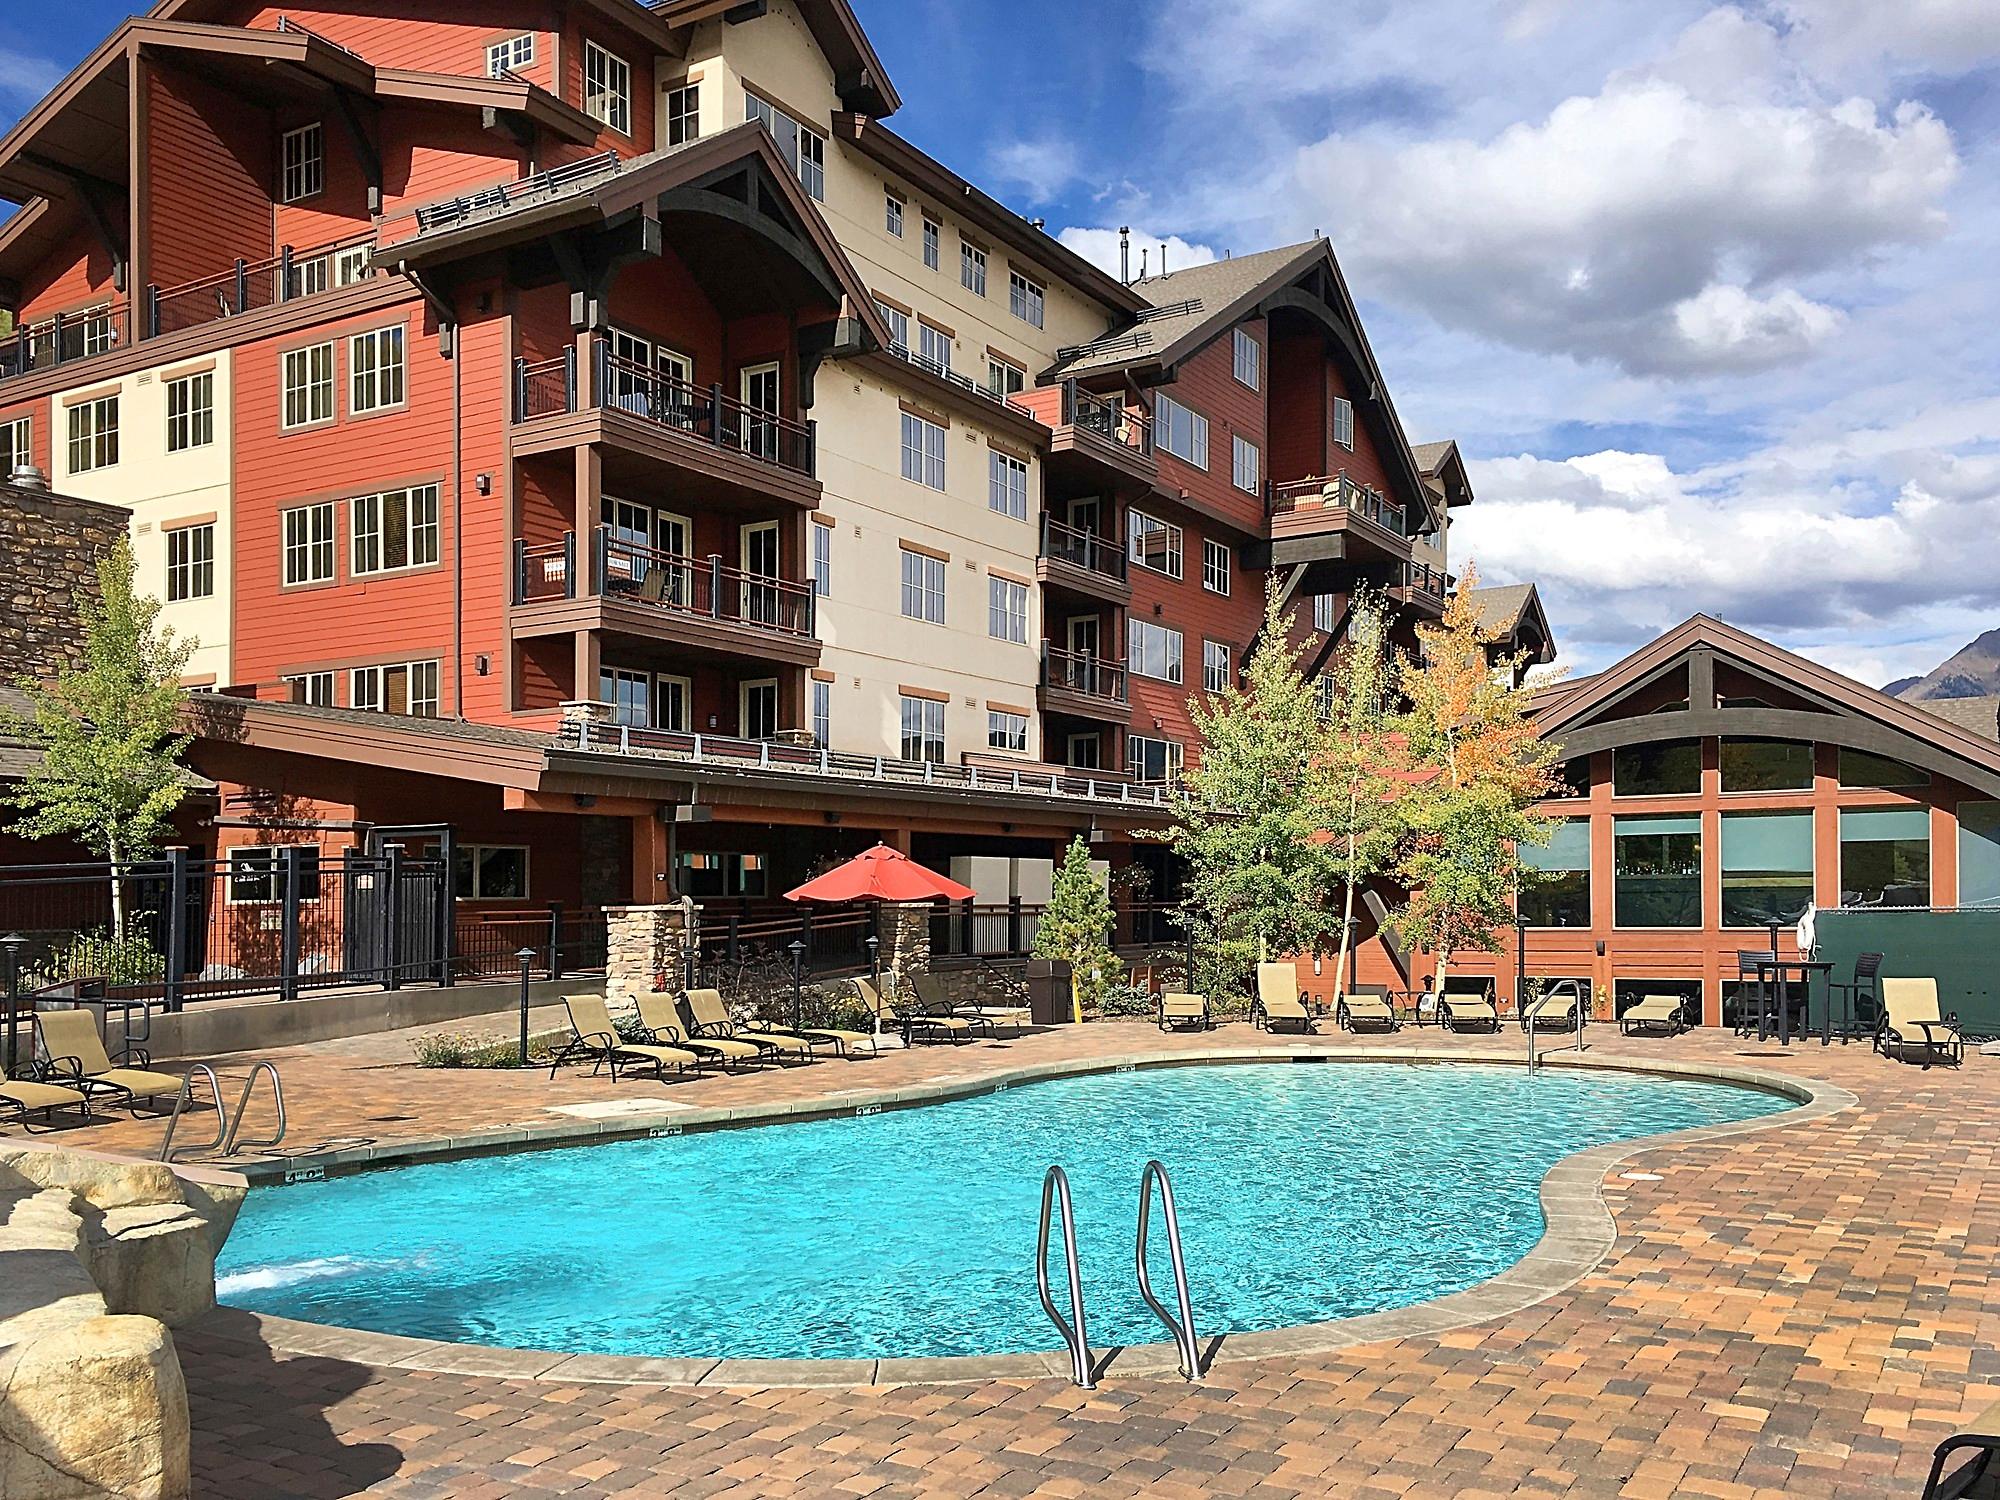 For an optional 4% resort fee, you will have access to the Durango Mountain Club which includes an outdoor heated pool with slide, outdoor hot tub and workout facility. 